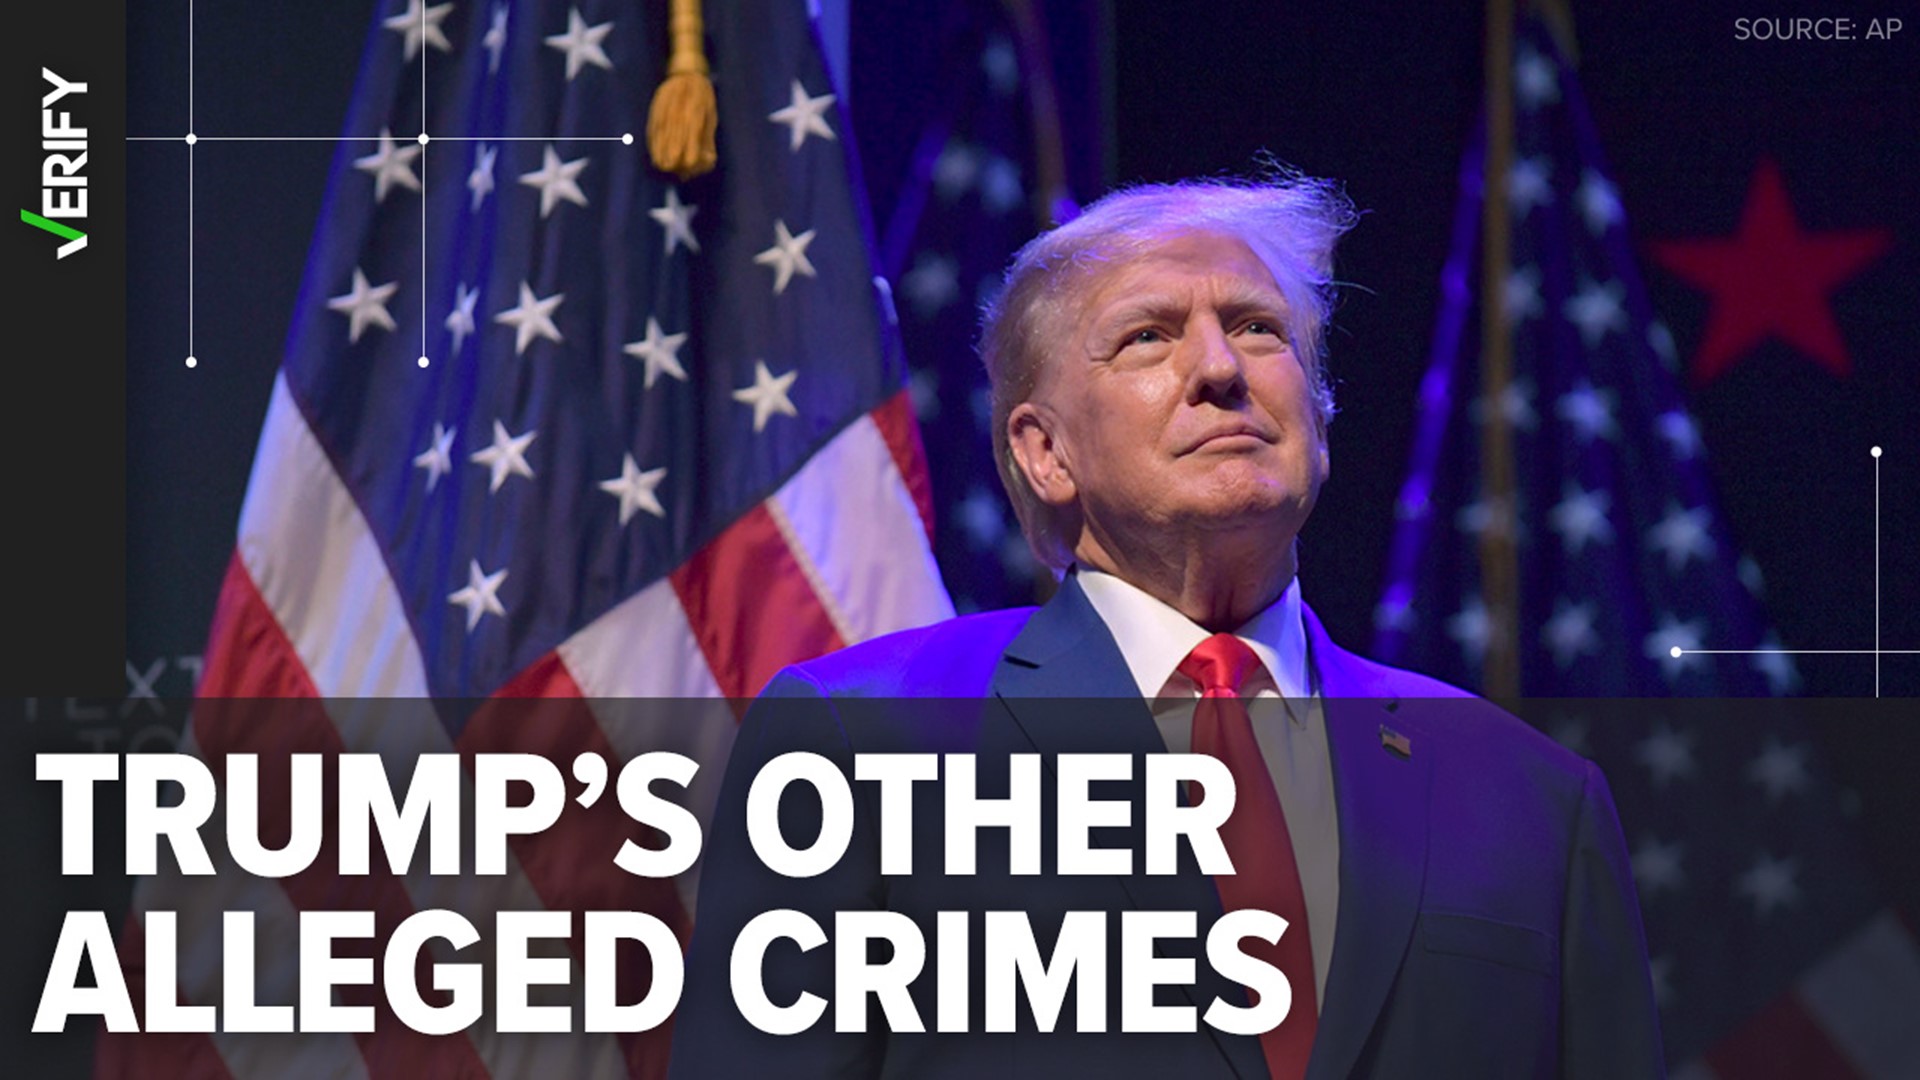 After former President Trump was indicted in New York, VERIFY readers asked if he’s under investigation for other crimes. That’s true.